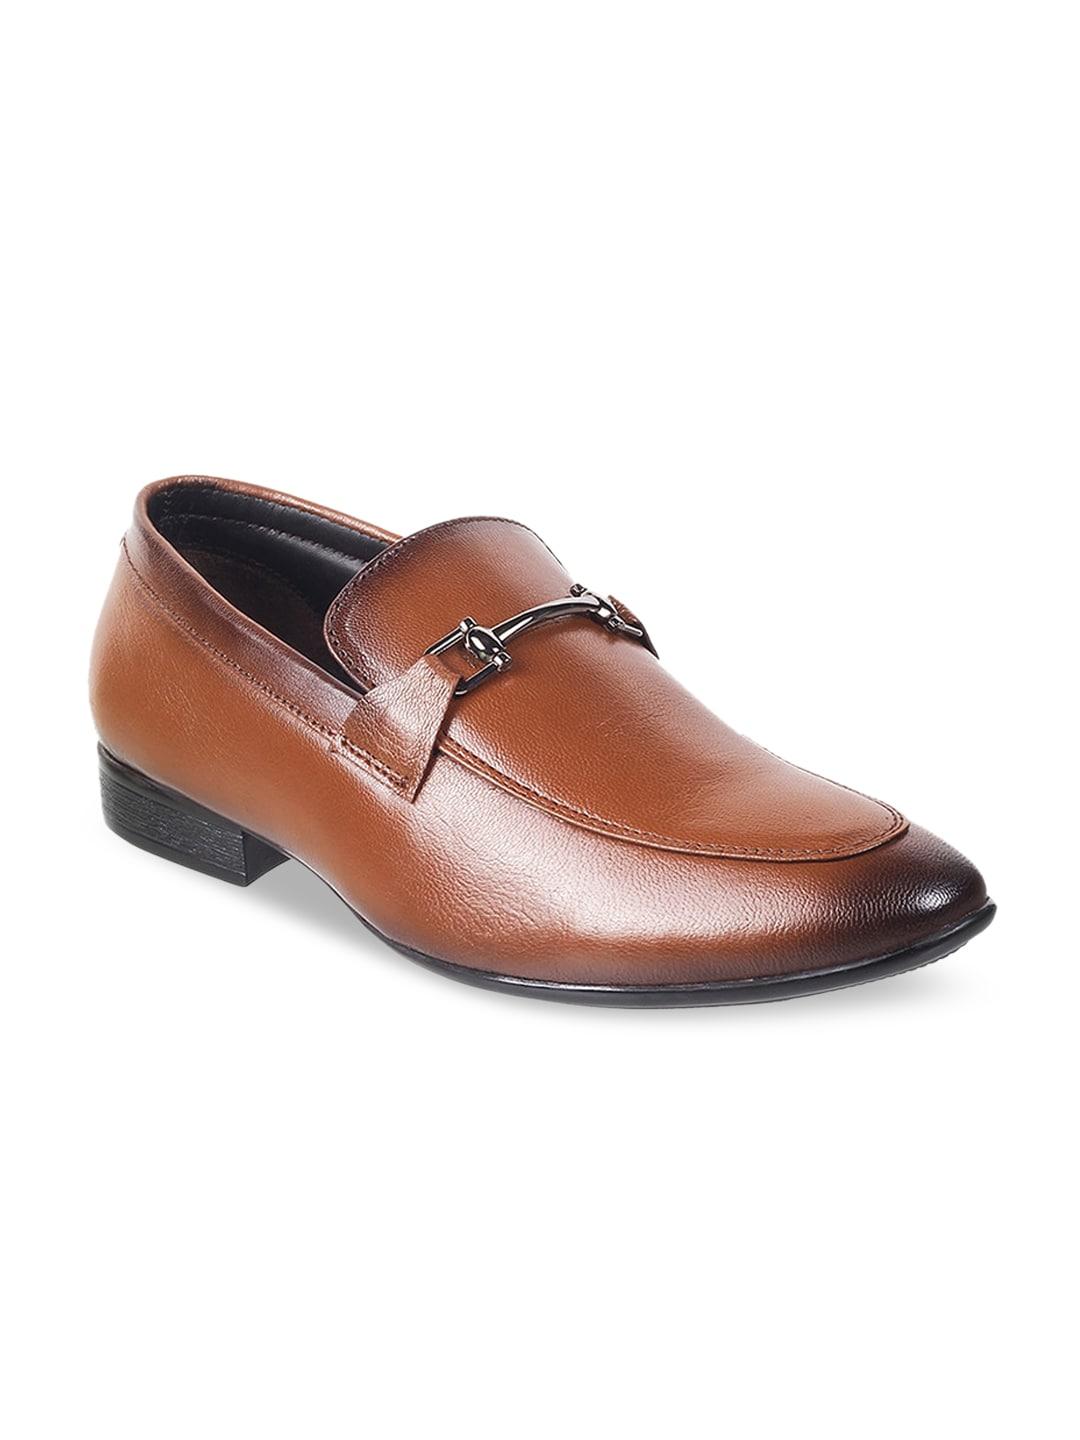 mochi-men-tan-brown-solid-leather-loafers-formal-shoes